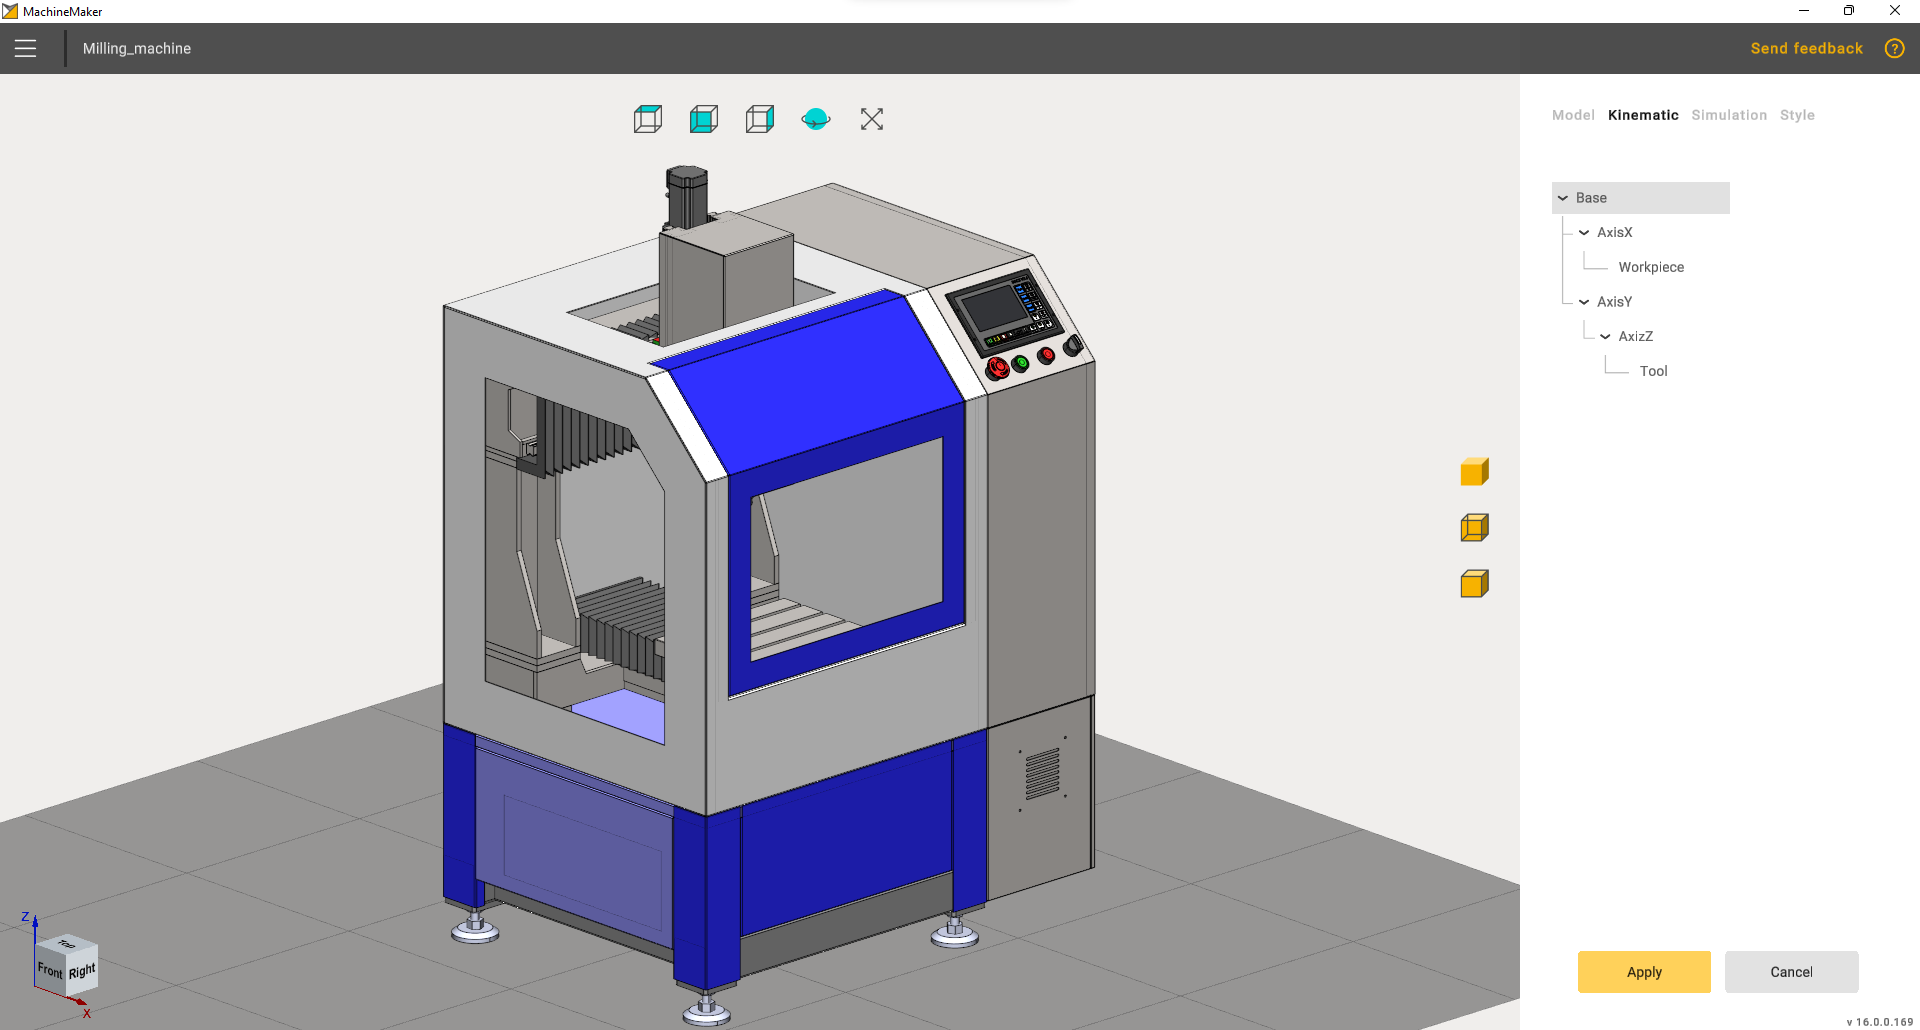 MachineMaker-for-CNC-machines.png - 148.12 kB